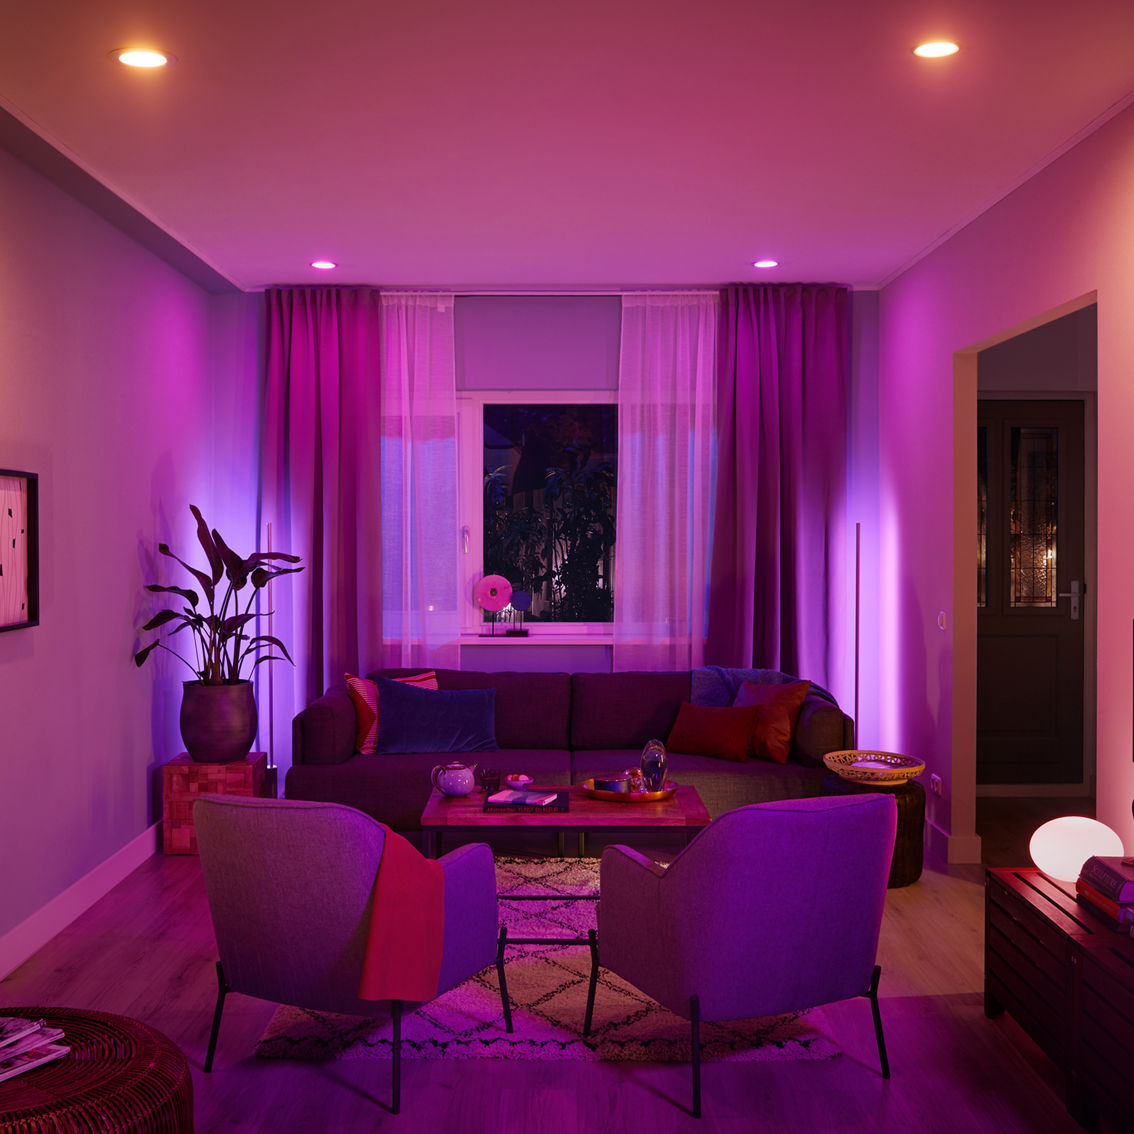 Philips Hue White and Color Ambiance 5/6 in. High Lumen Recessed Downlight - Image 3 of 6